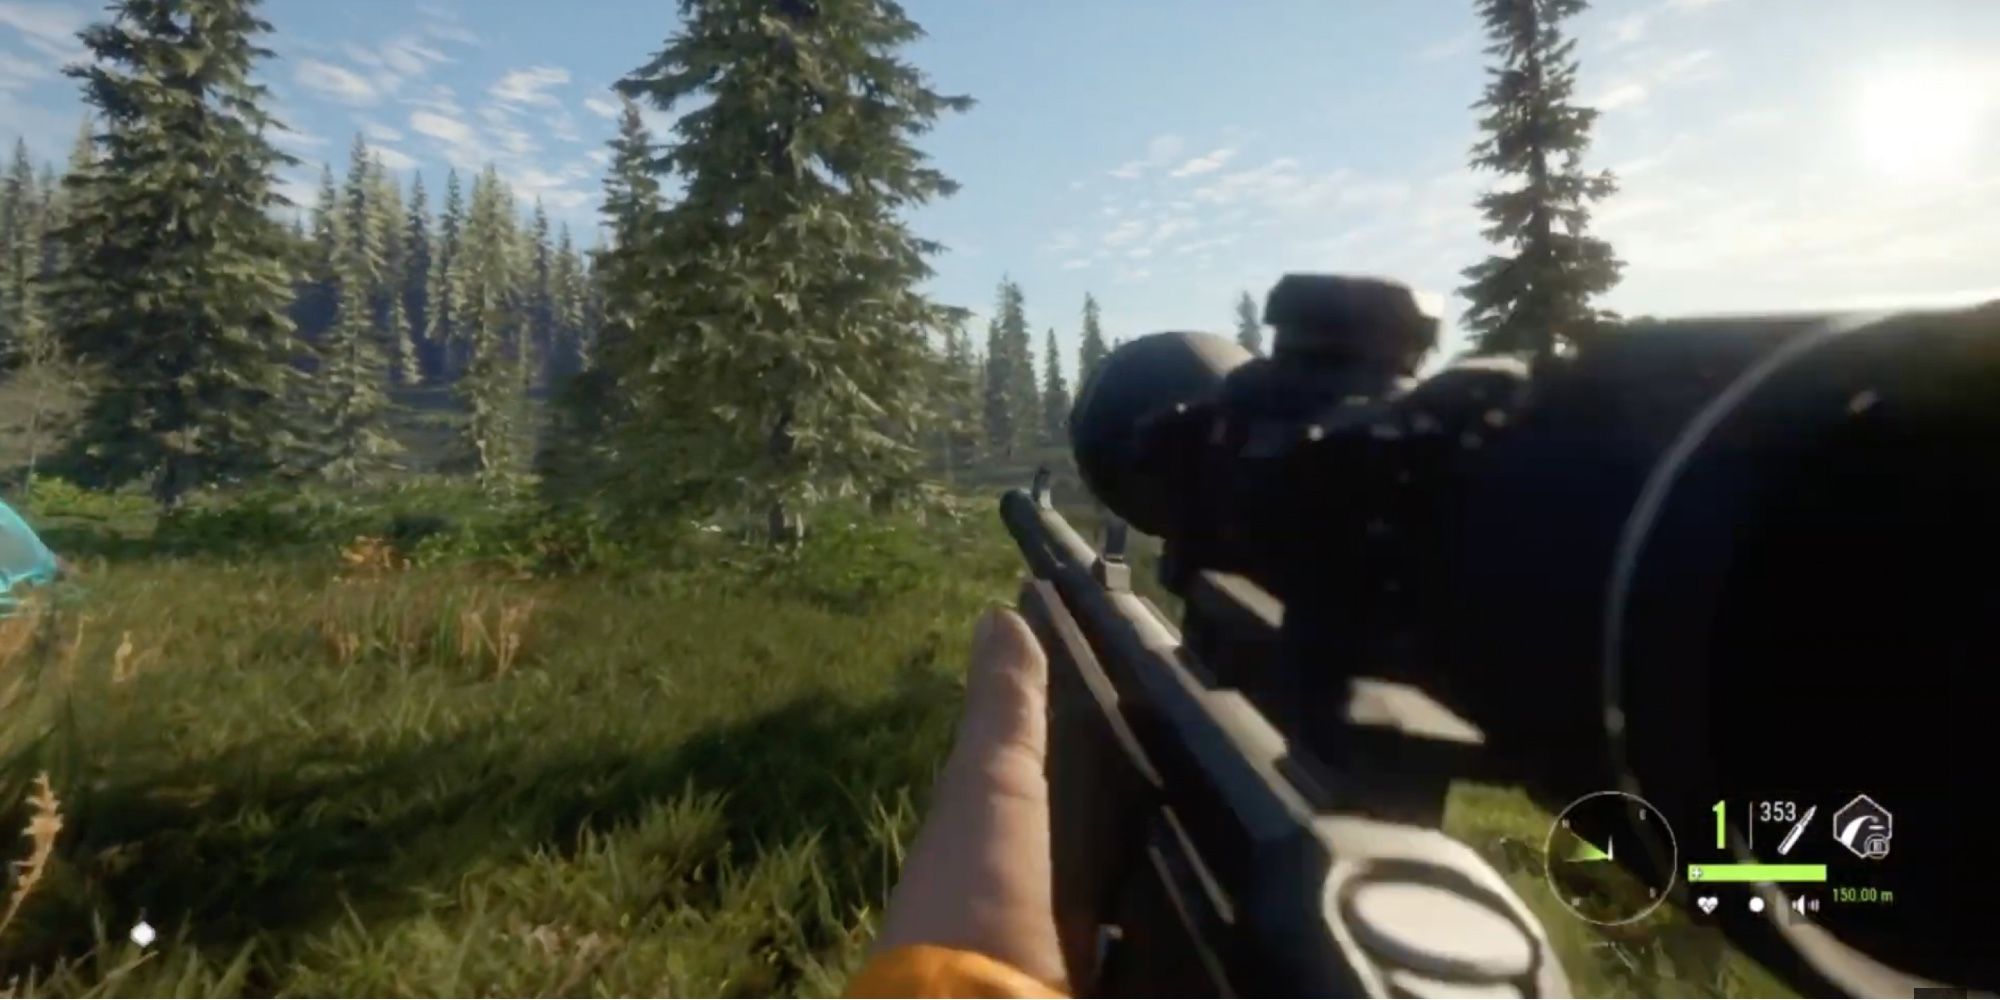 TheHunter: Call of the Wild - Player hunts for game with Rangemaster 338